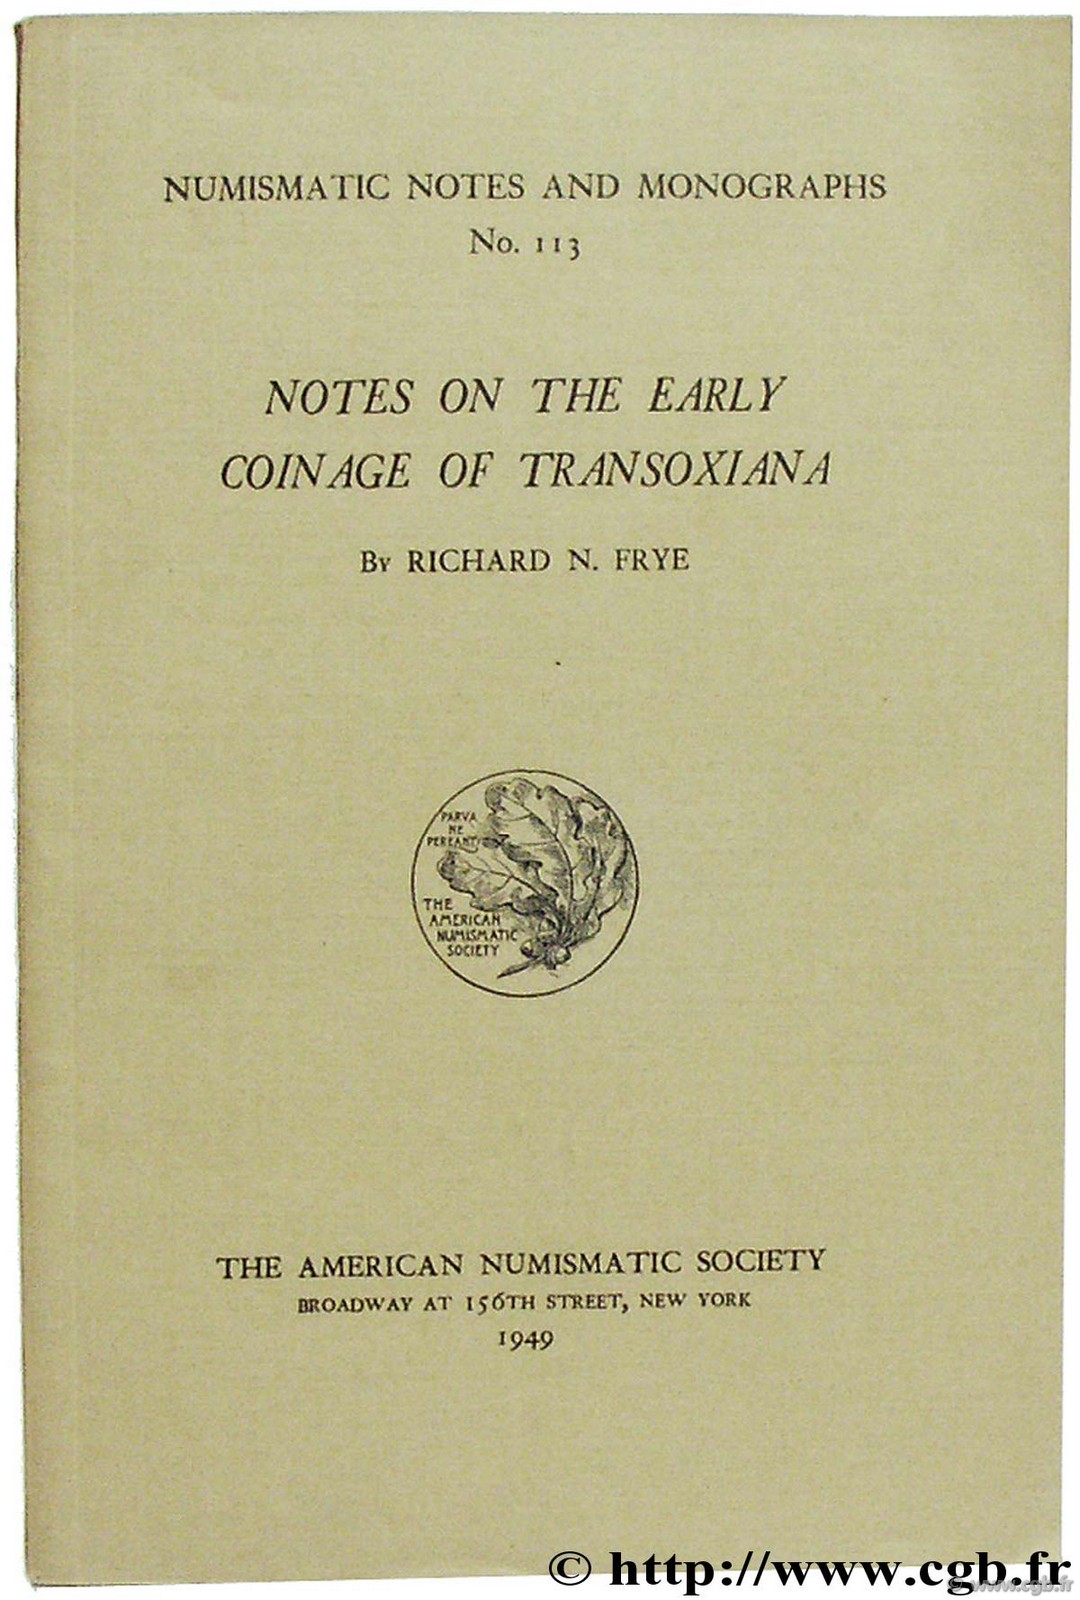 Note on the Early Coinage of Transoxiana, NNM n° 113 FRYE R.-N.